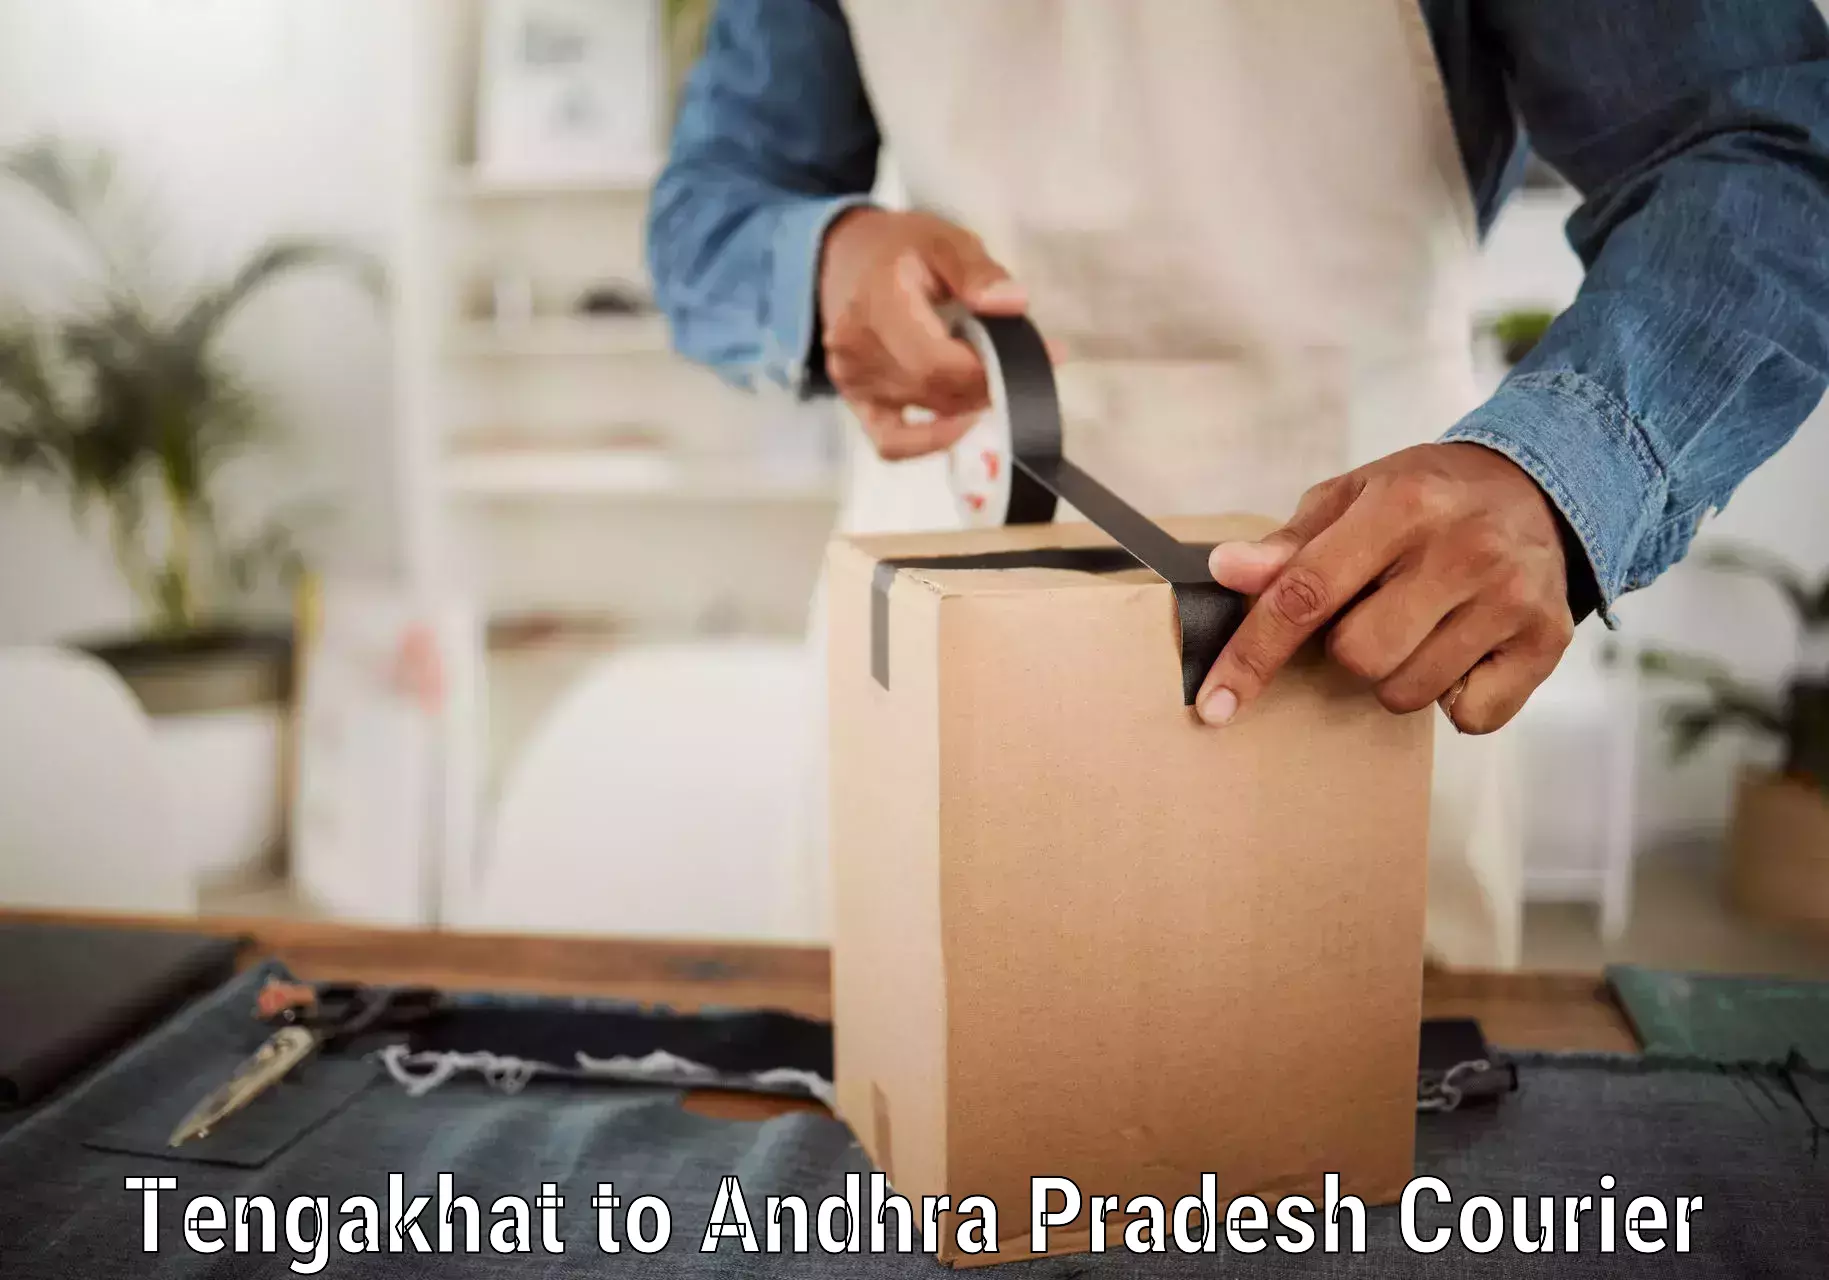 Courier service innovation Tengakhat to Visakhapatnam